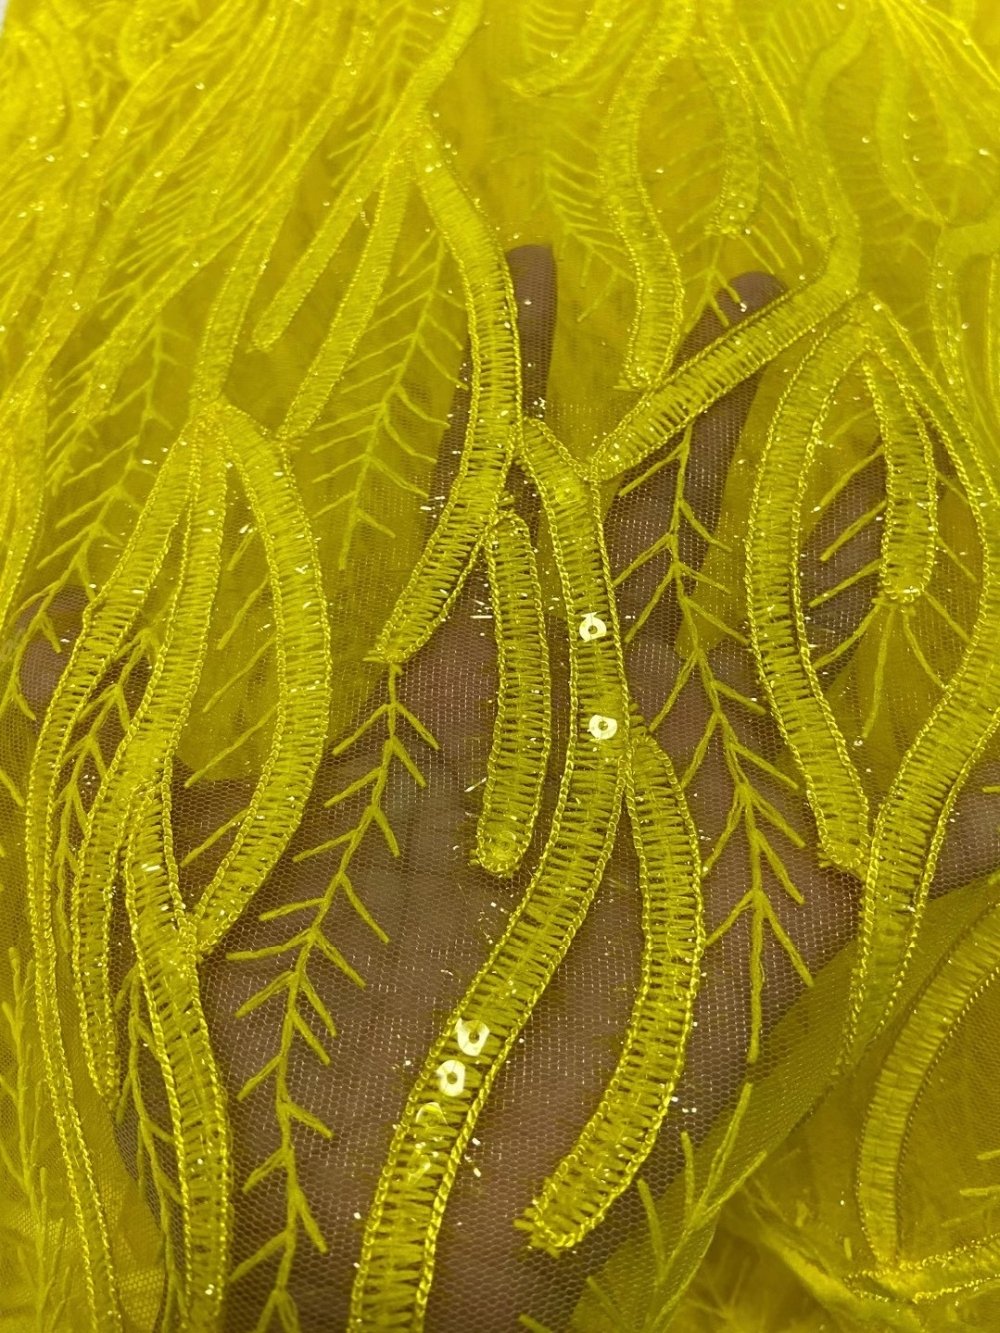 5 YARDS / Yellow Funky Party Glitter Sequin Beaded Embroidery Tulle Mesh Lace Fabric - Classic & Modern